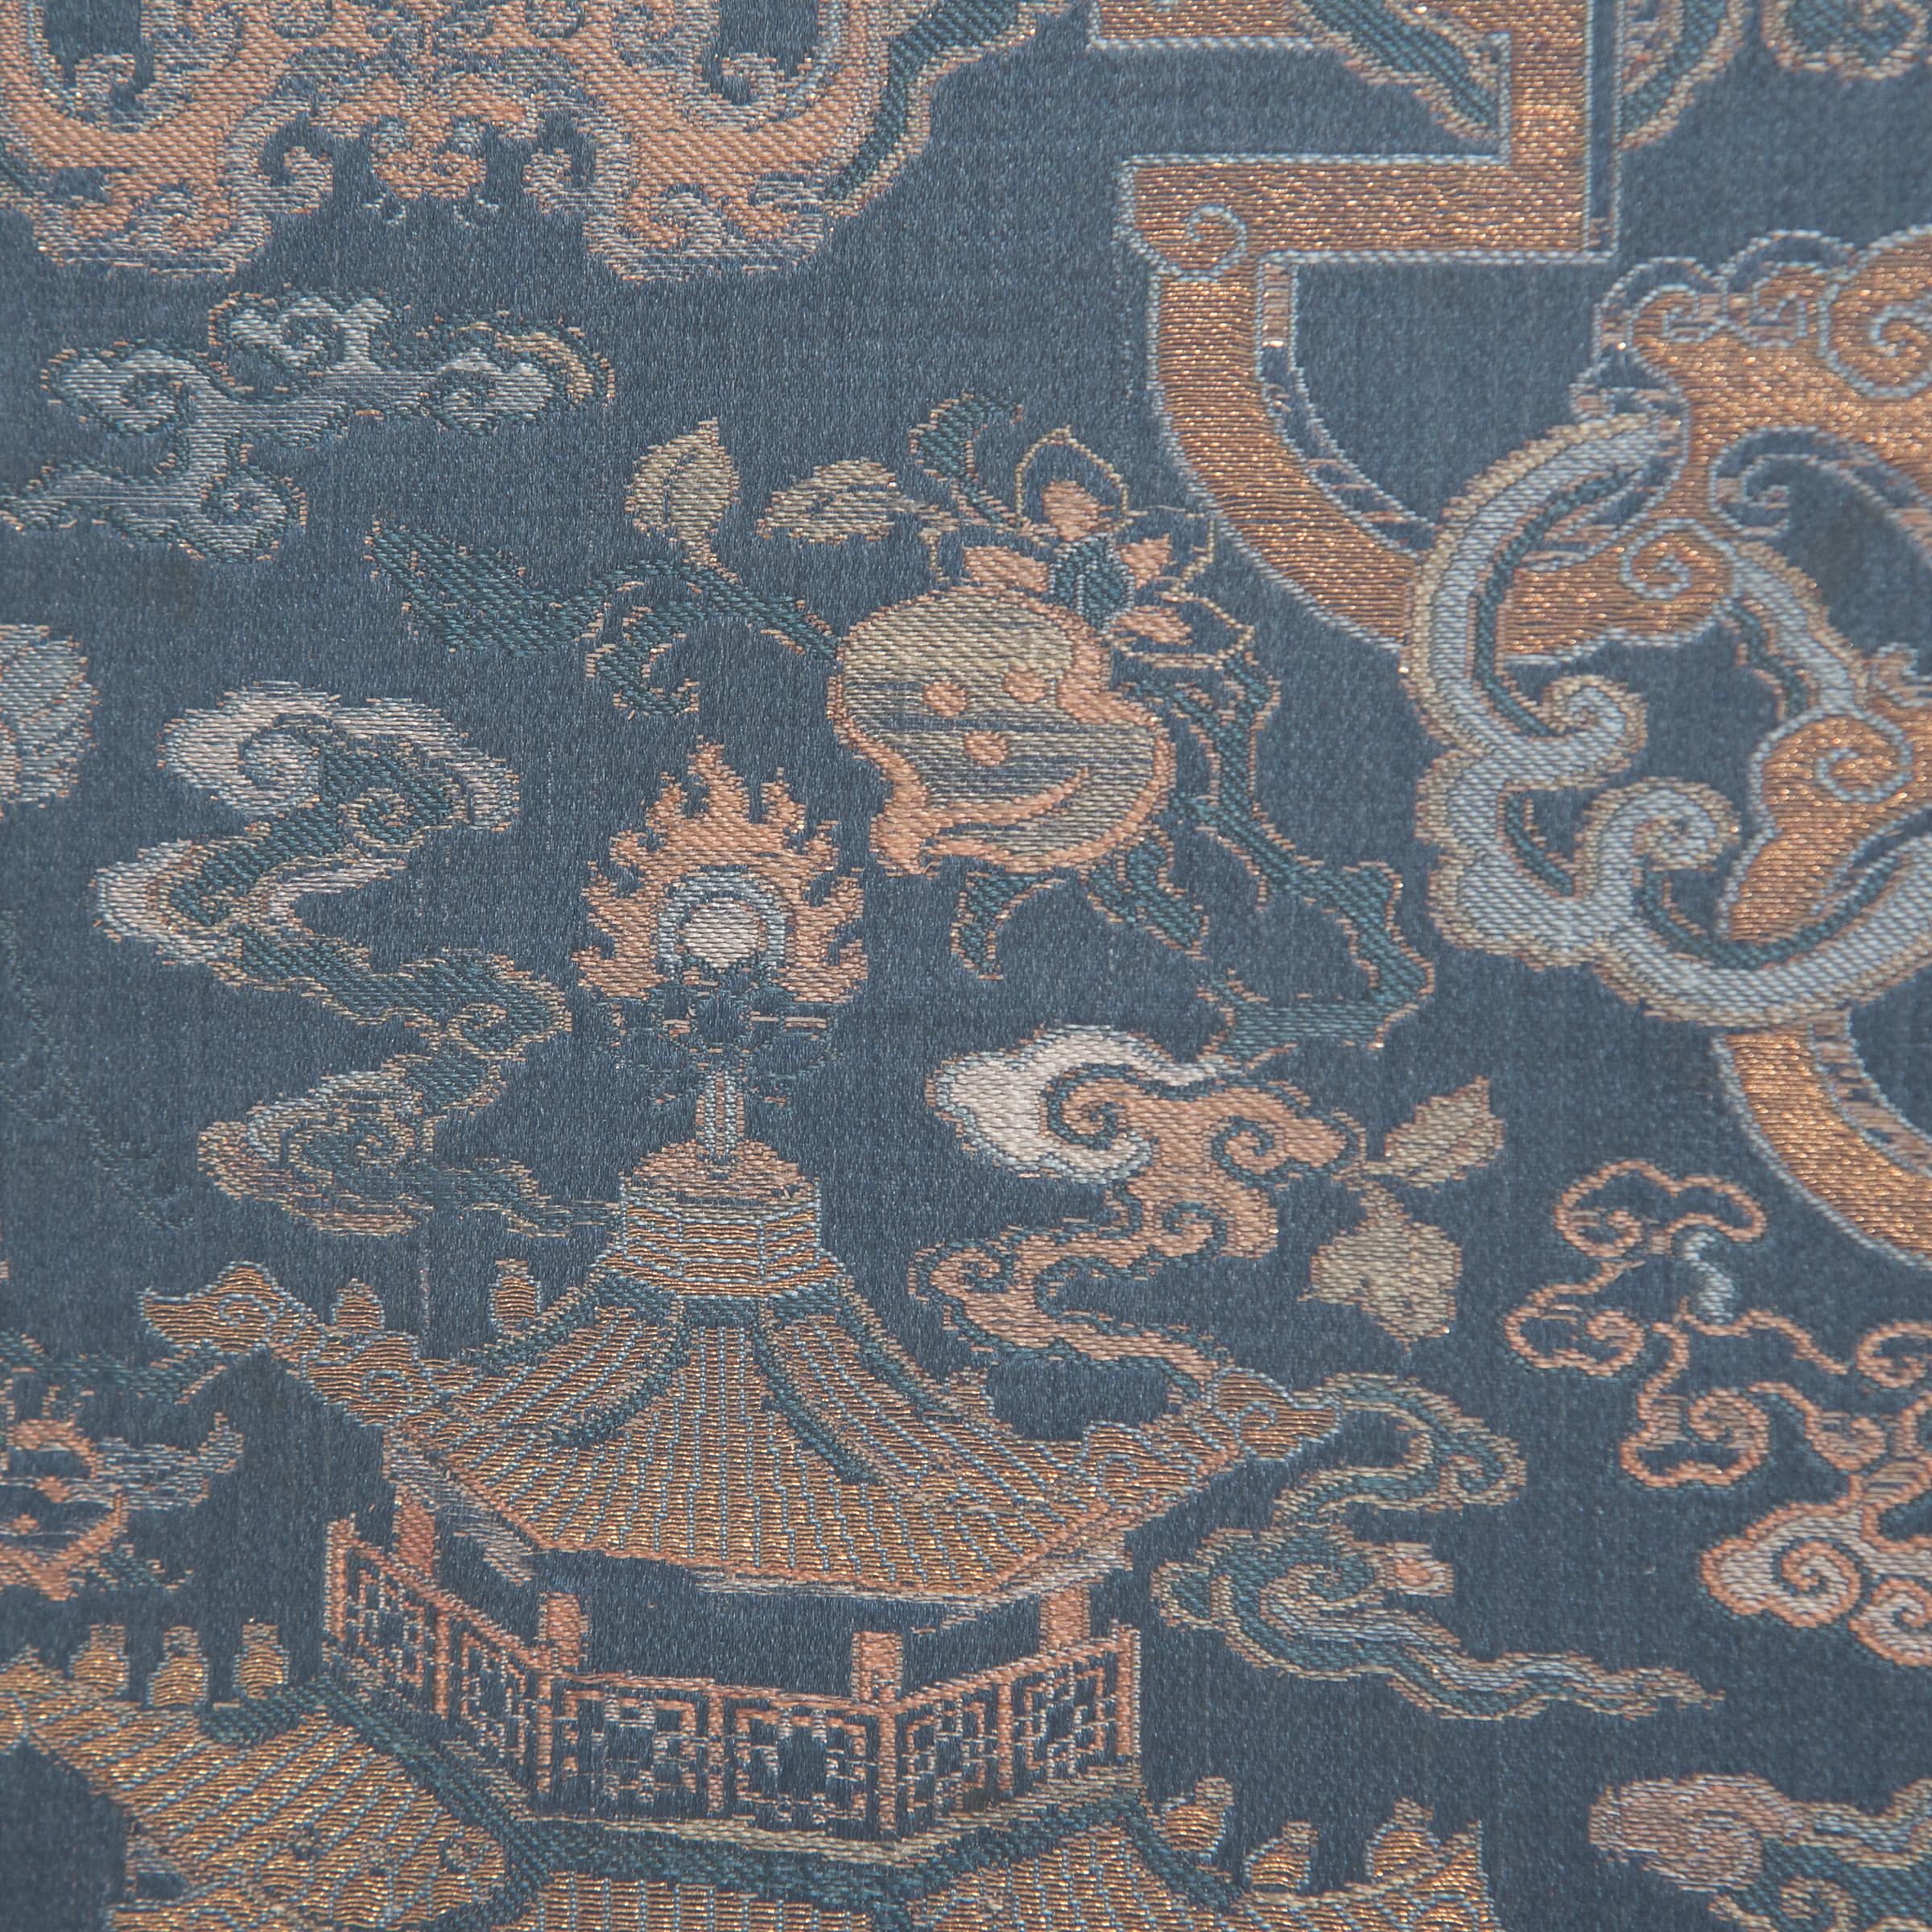 Woven Pair of Framed Chinese Silk Brocade Chair Panels, c. 1850 For Sale